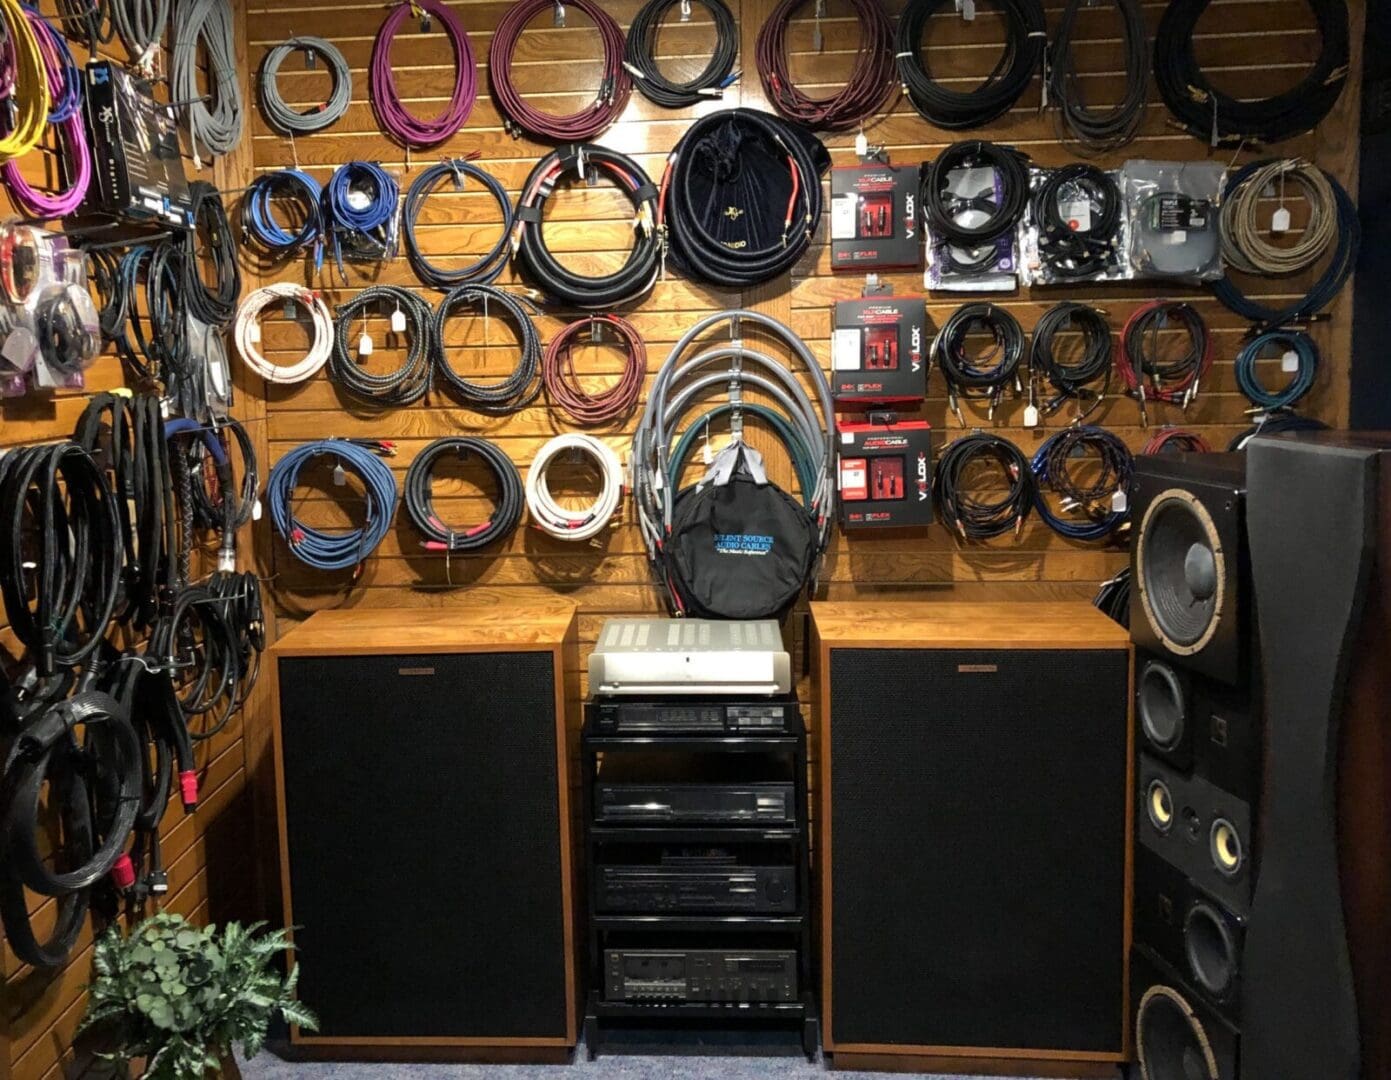 The Sound Station in Bartlesville's cable room